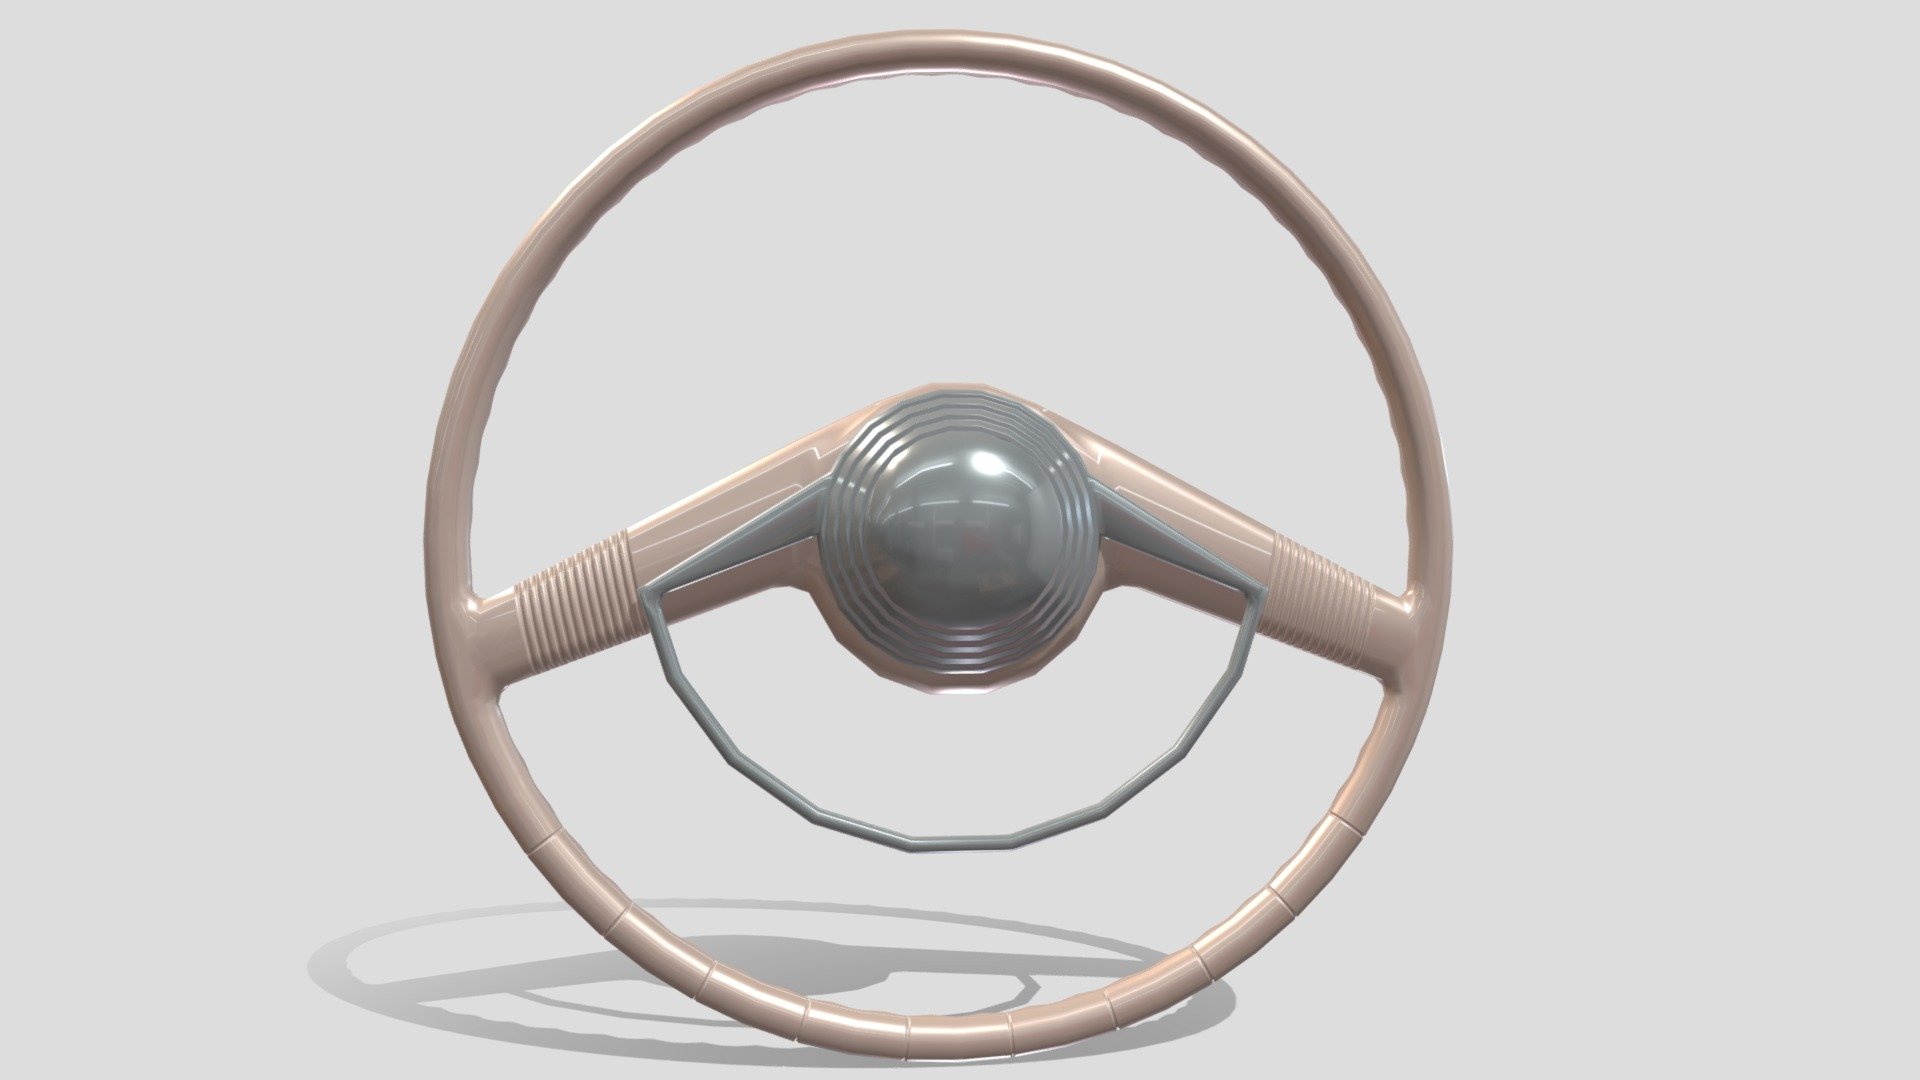 Generic 40s Car Steering wheel 3d model rendered with Cycles in Blender, as per seen on attached images.

File formats:
-.blend, rendered with cycles, as seen in the images;
-.obj, with materials applied;
-.dae, with materials applied;
-.fbx, with materials applied;
-.stl;

Files come named appropriately and split by file format.

3D Software:
The 3D model was originally created in Blender 2.8 and rendered with Cycles.

Materials and textures:
The models have materials applied in all formats, and are ready to import and render.

Preview scenes:
The preview images are rendered in Blender using its built-in render engine &lsquo;Cycles'.
Note that the blend files come directly with the rendering scene included and the render command will generate the exact result as seen in previews.
Scene elements are on a different layer from the actual model for easier manipulation of objects 3d model